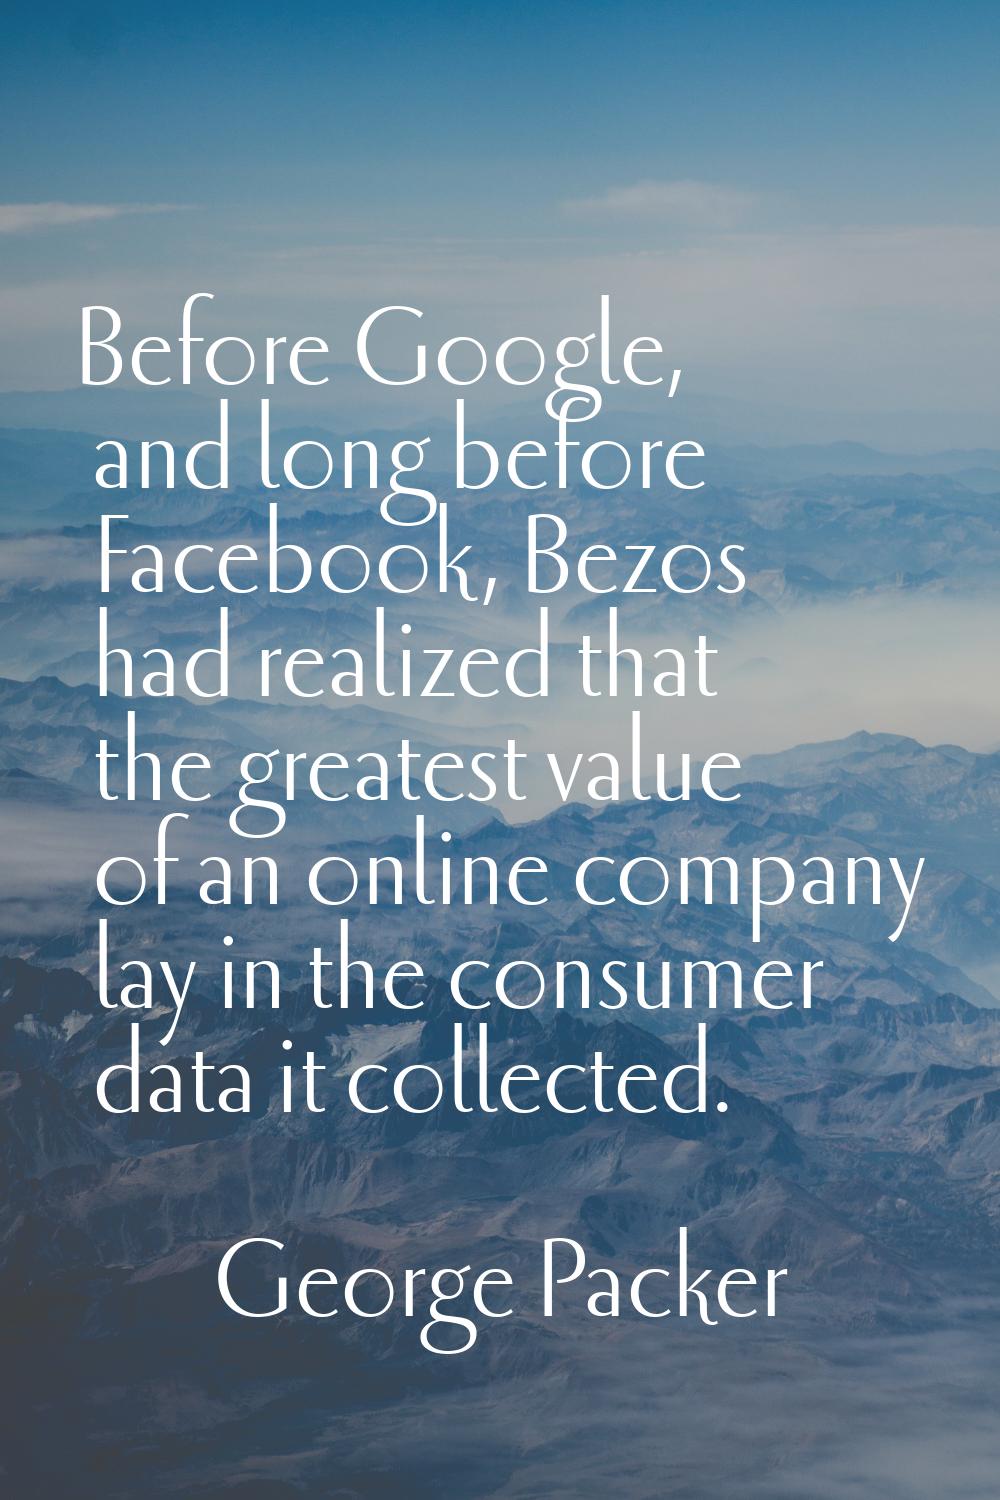 Before Google, and long before Facebook, Bezos had realized that the greatest value of an online co